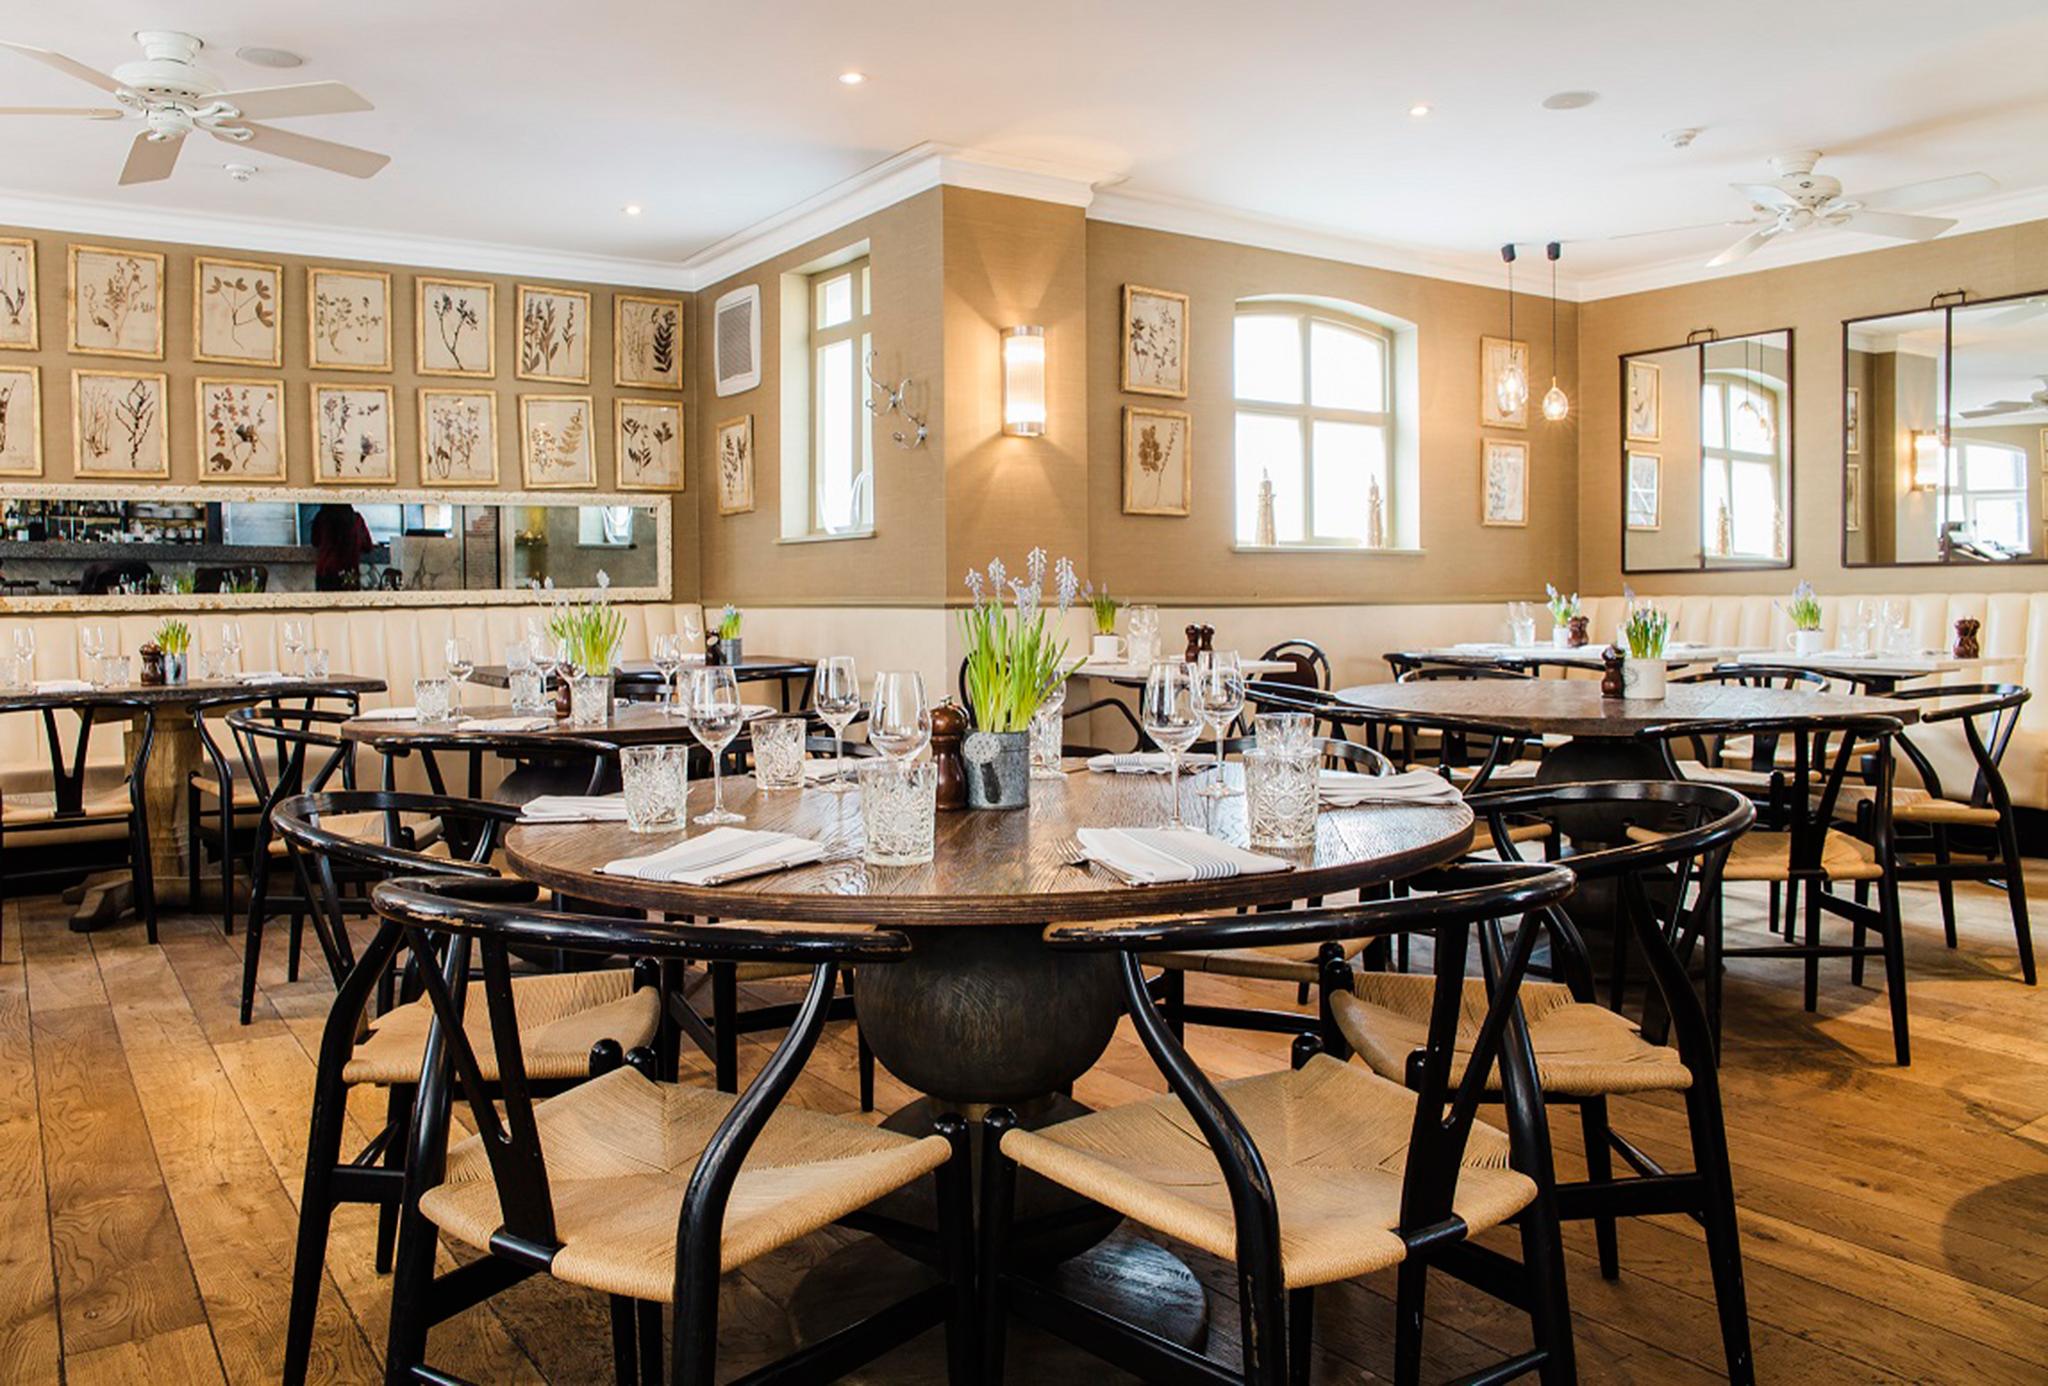 The Brasserie of Mews of Mayfair